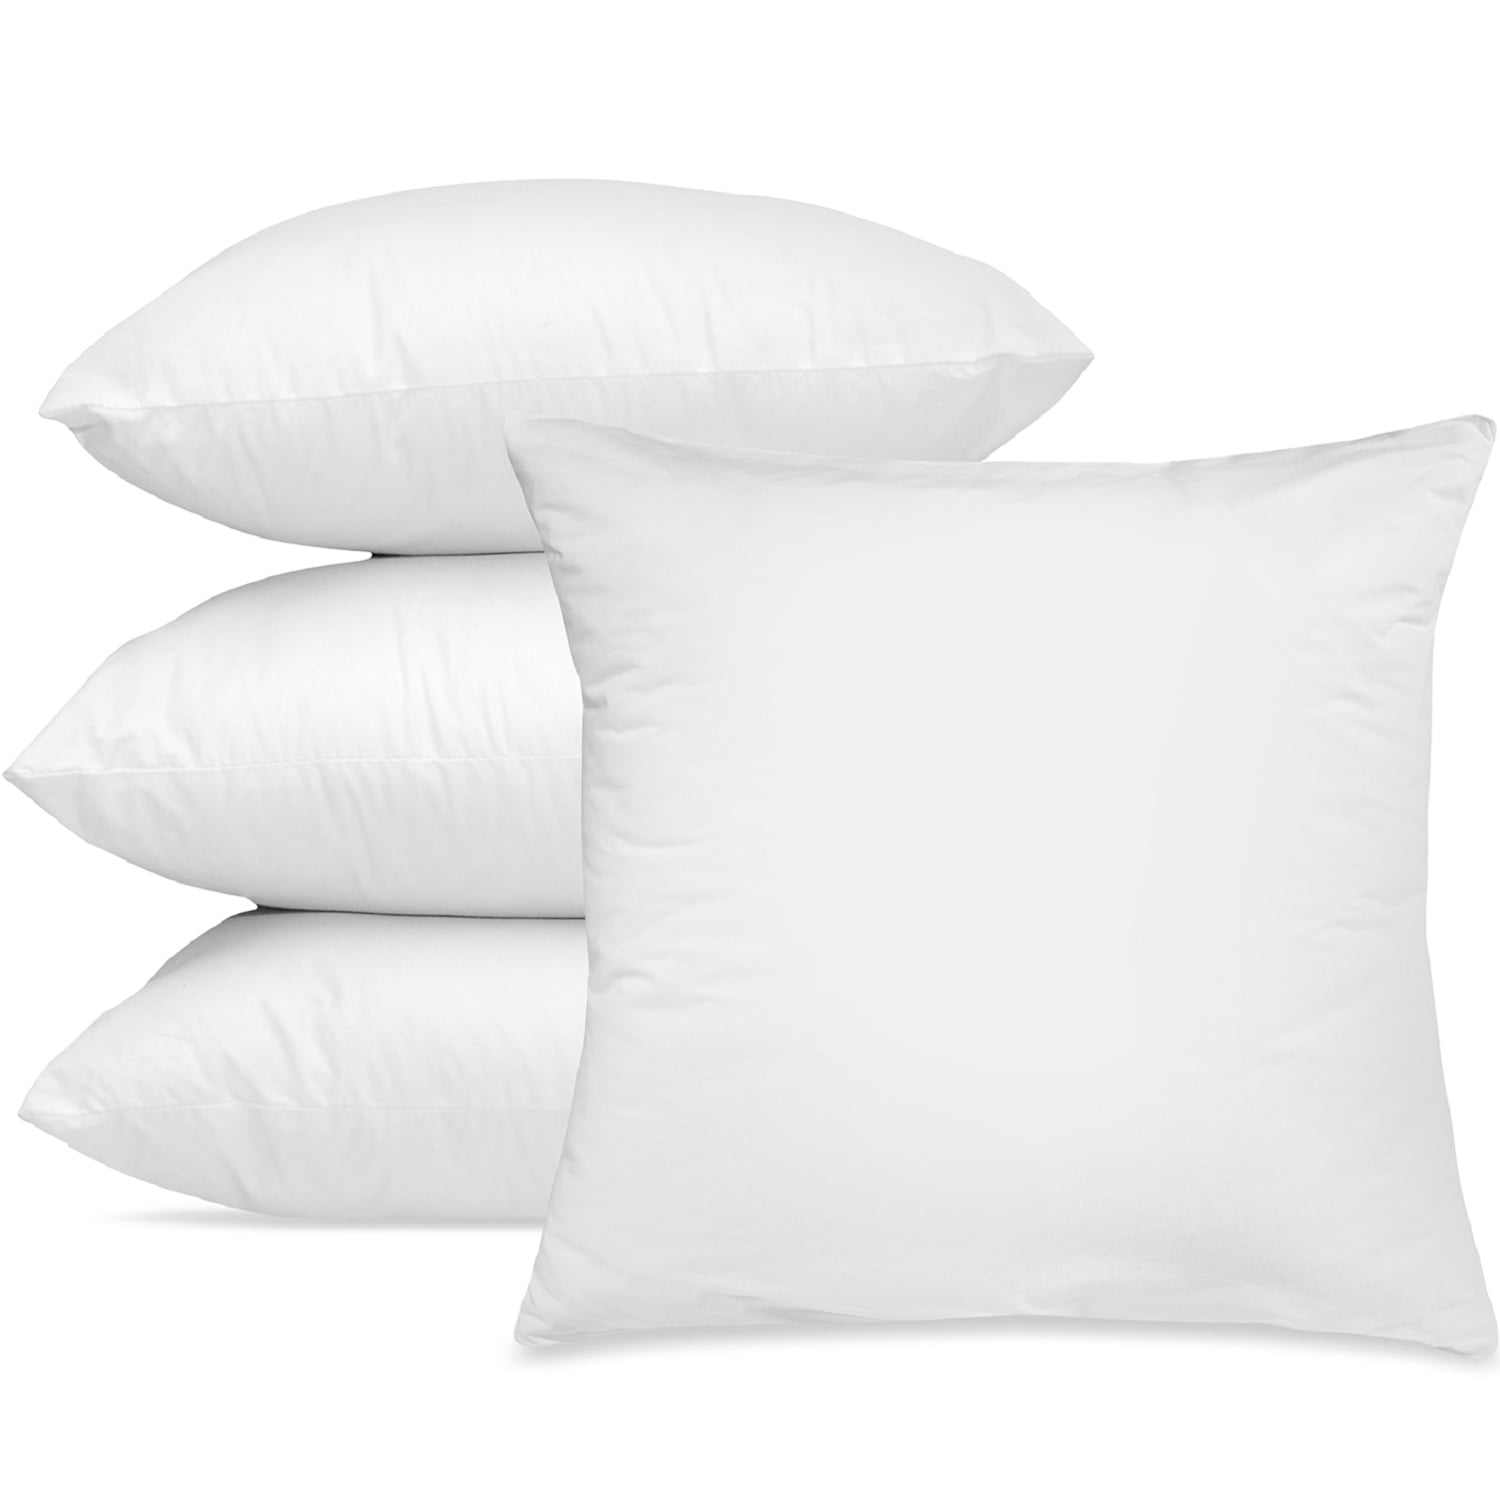  MENGT Throw Pillow Inserts 18” x 18 Set of 4 Ultra-Soft  Hypoallergenic Square Couch Pillows with Polycotton Filling for Bed, Sofa,  Sleeping, Decorating(White) : Home & Kitchen